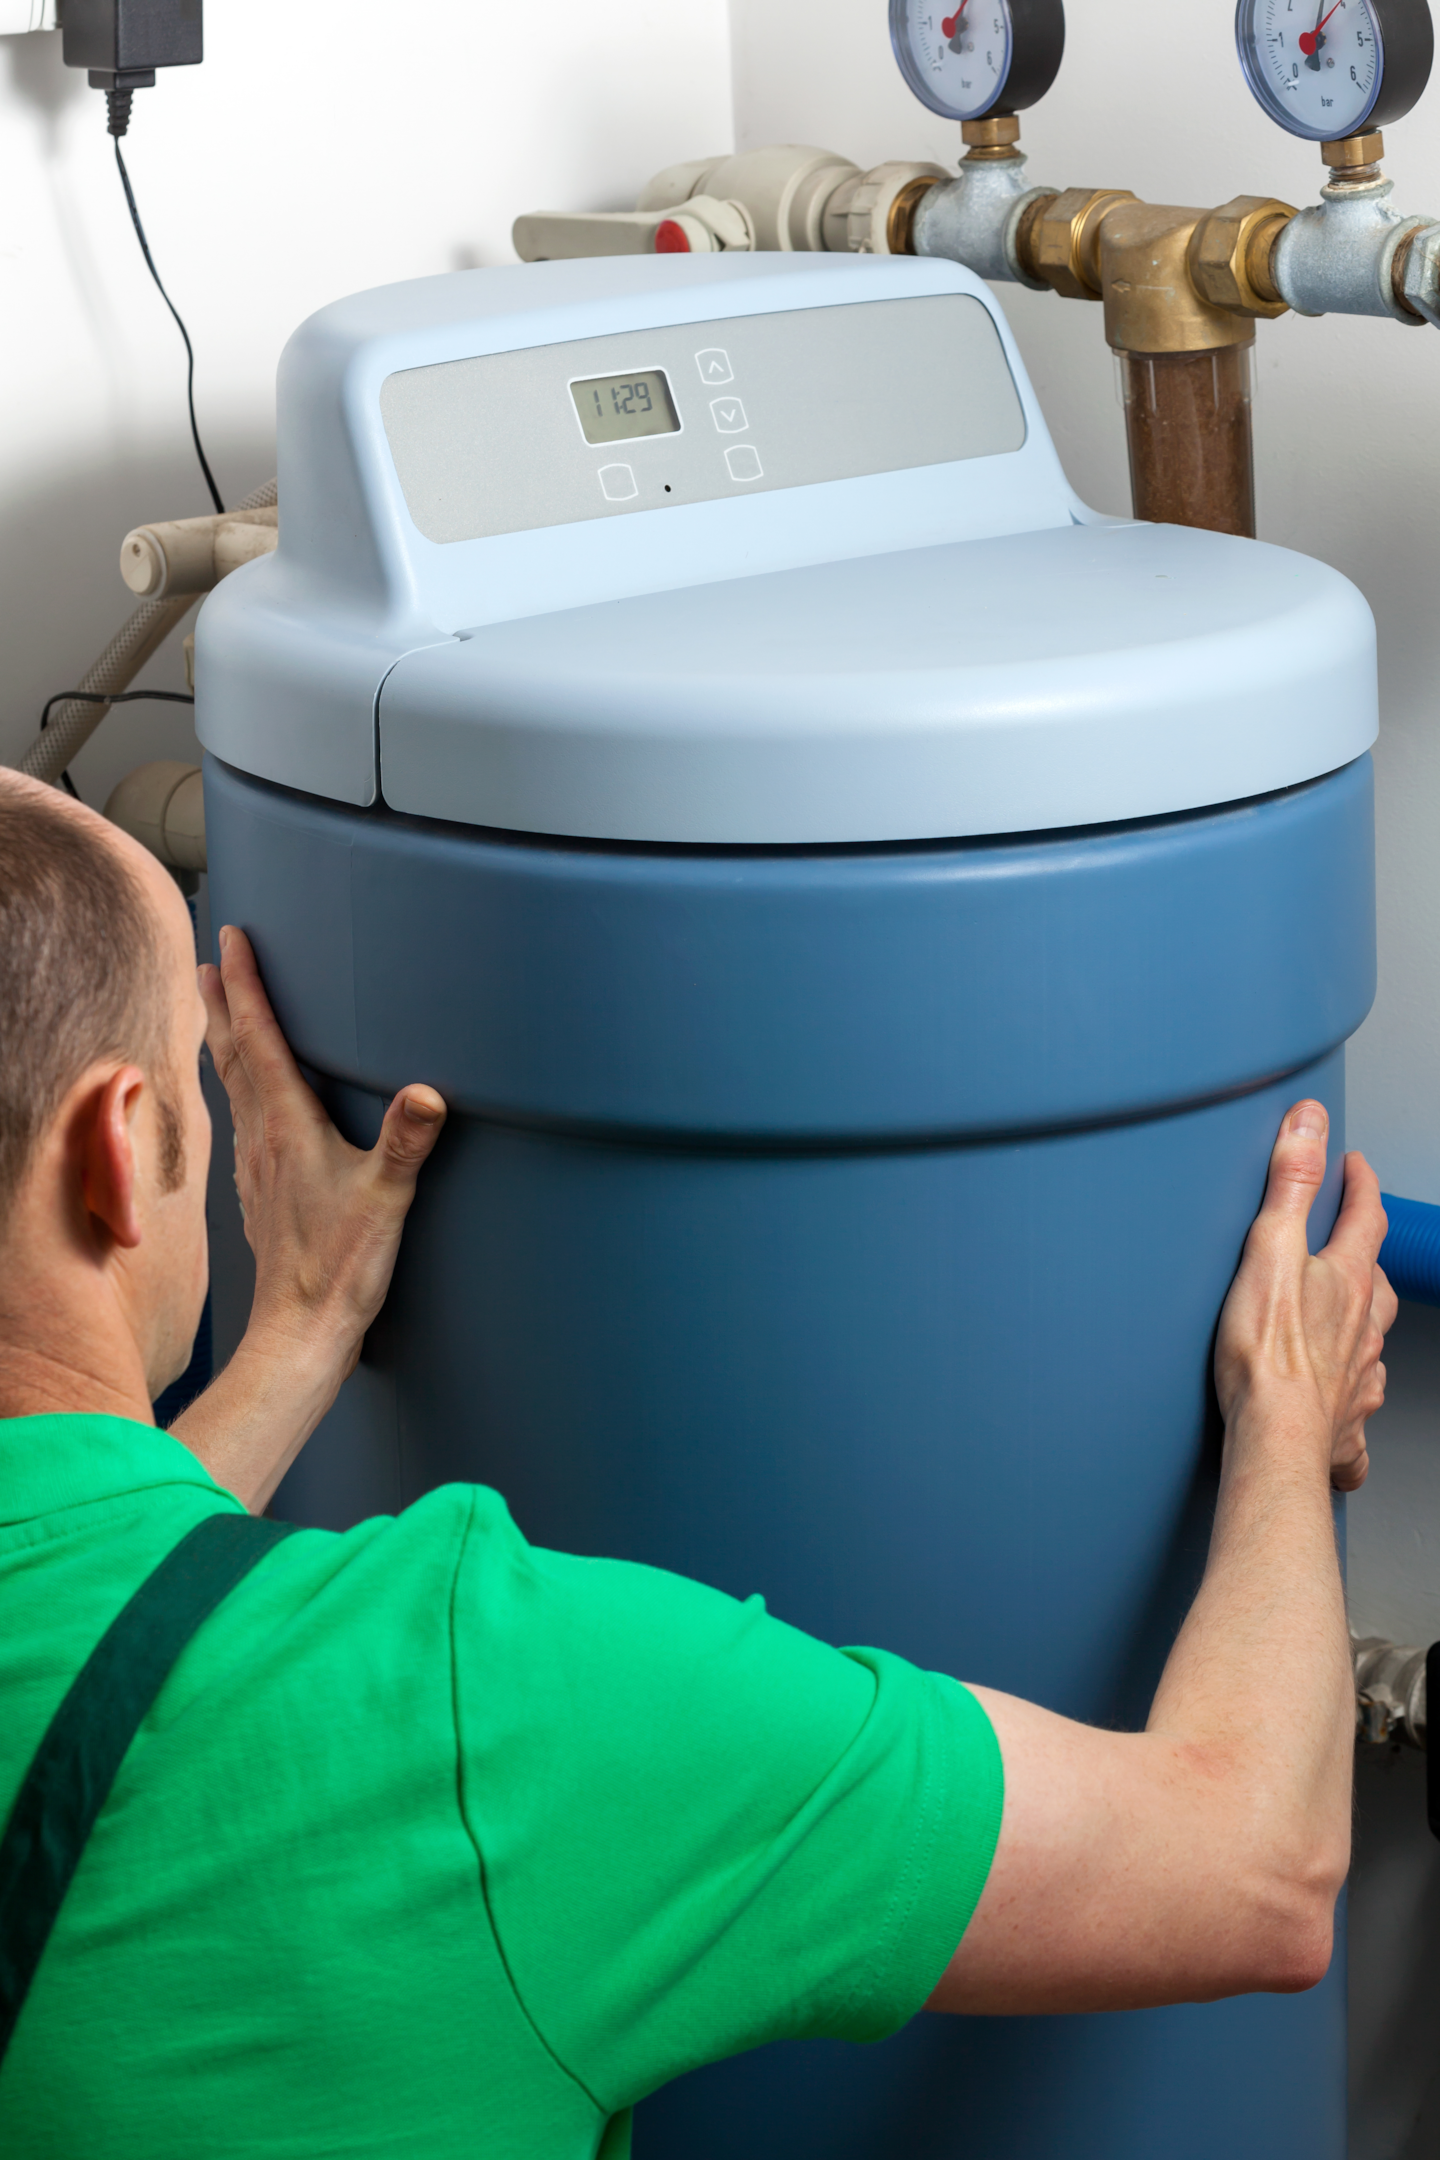 A person installing a water softener system in a home